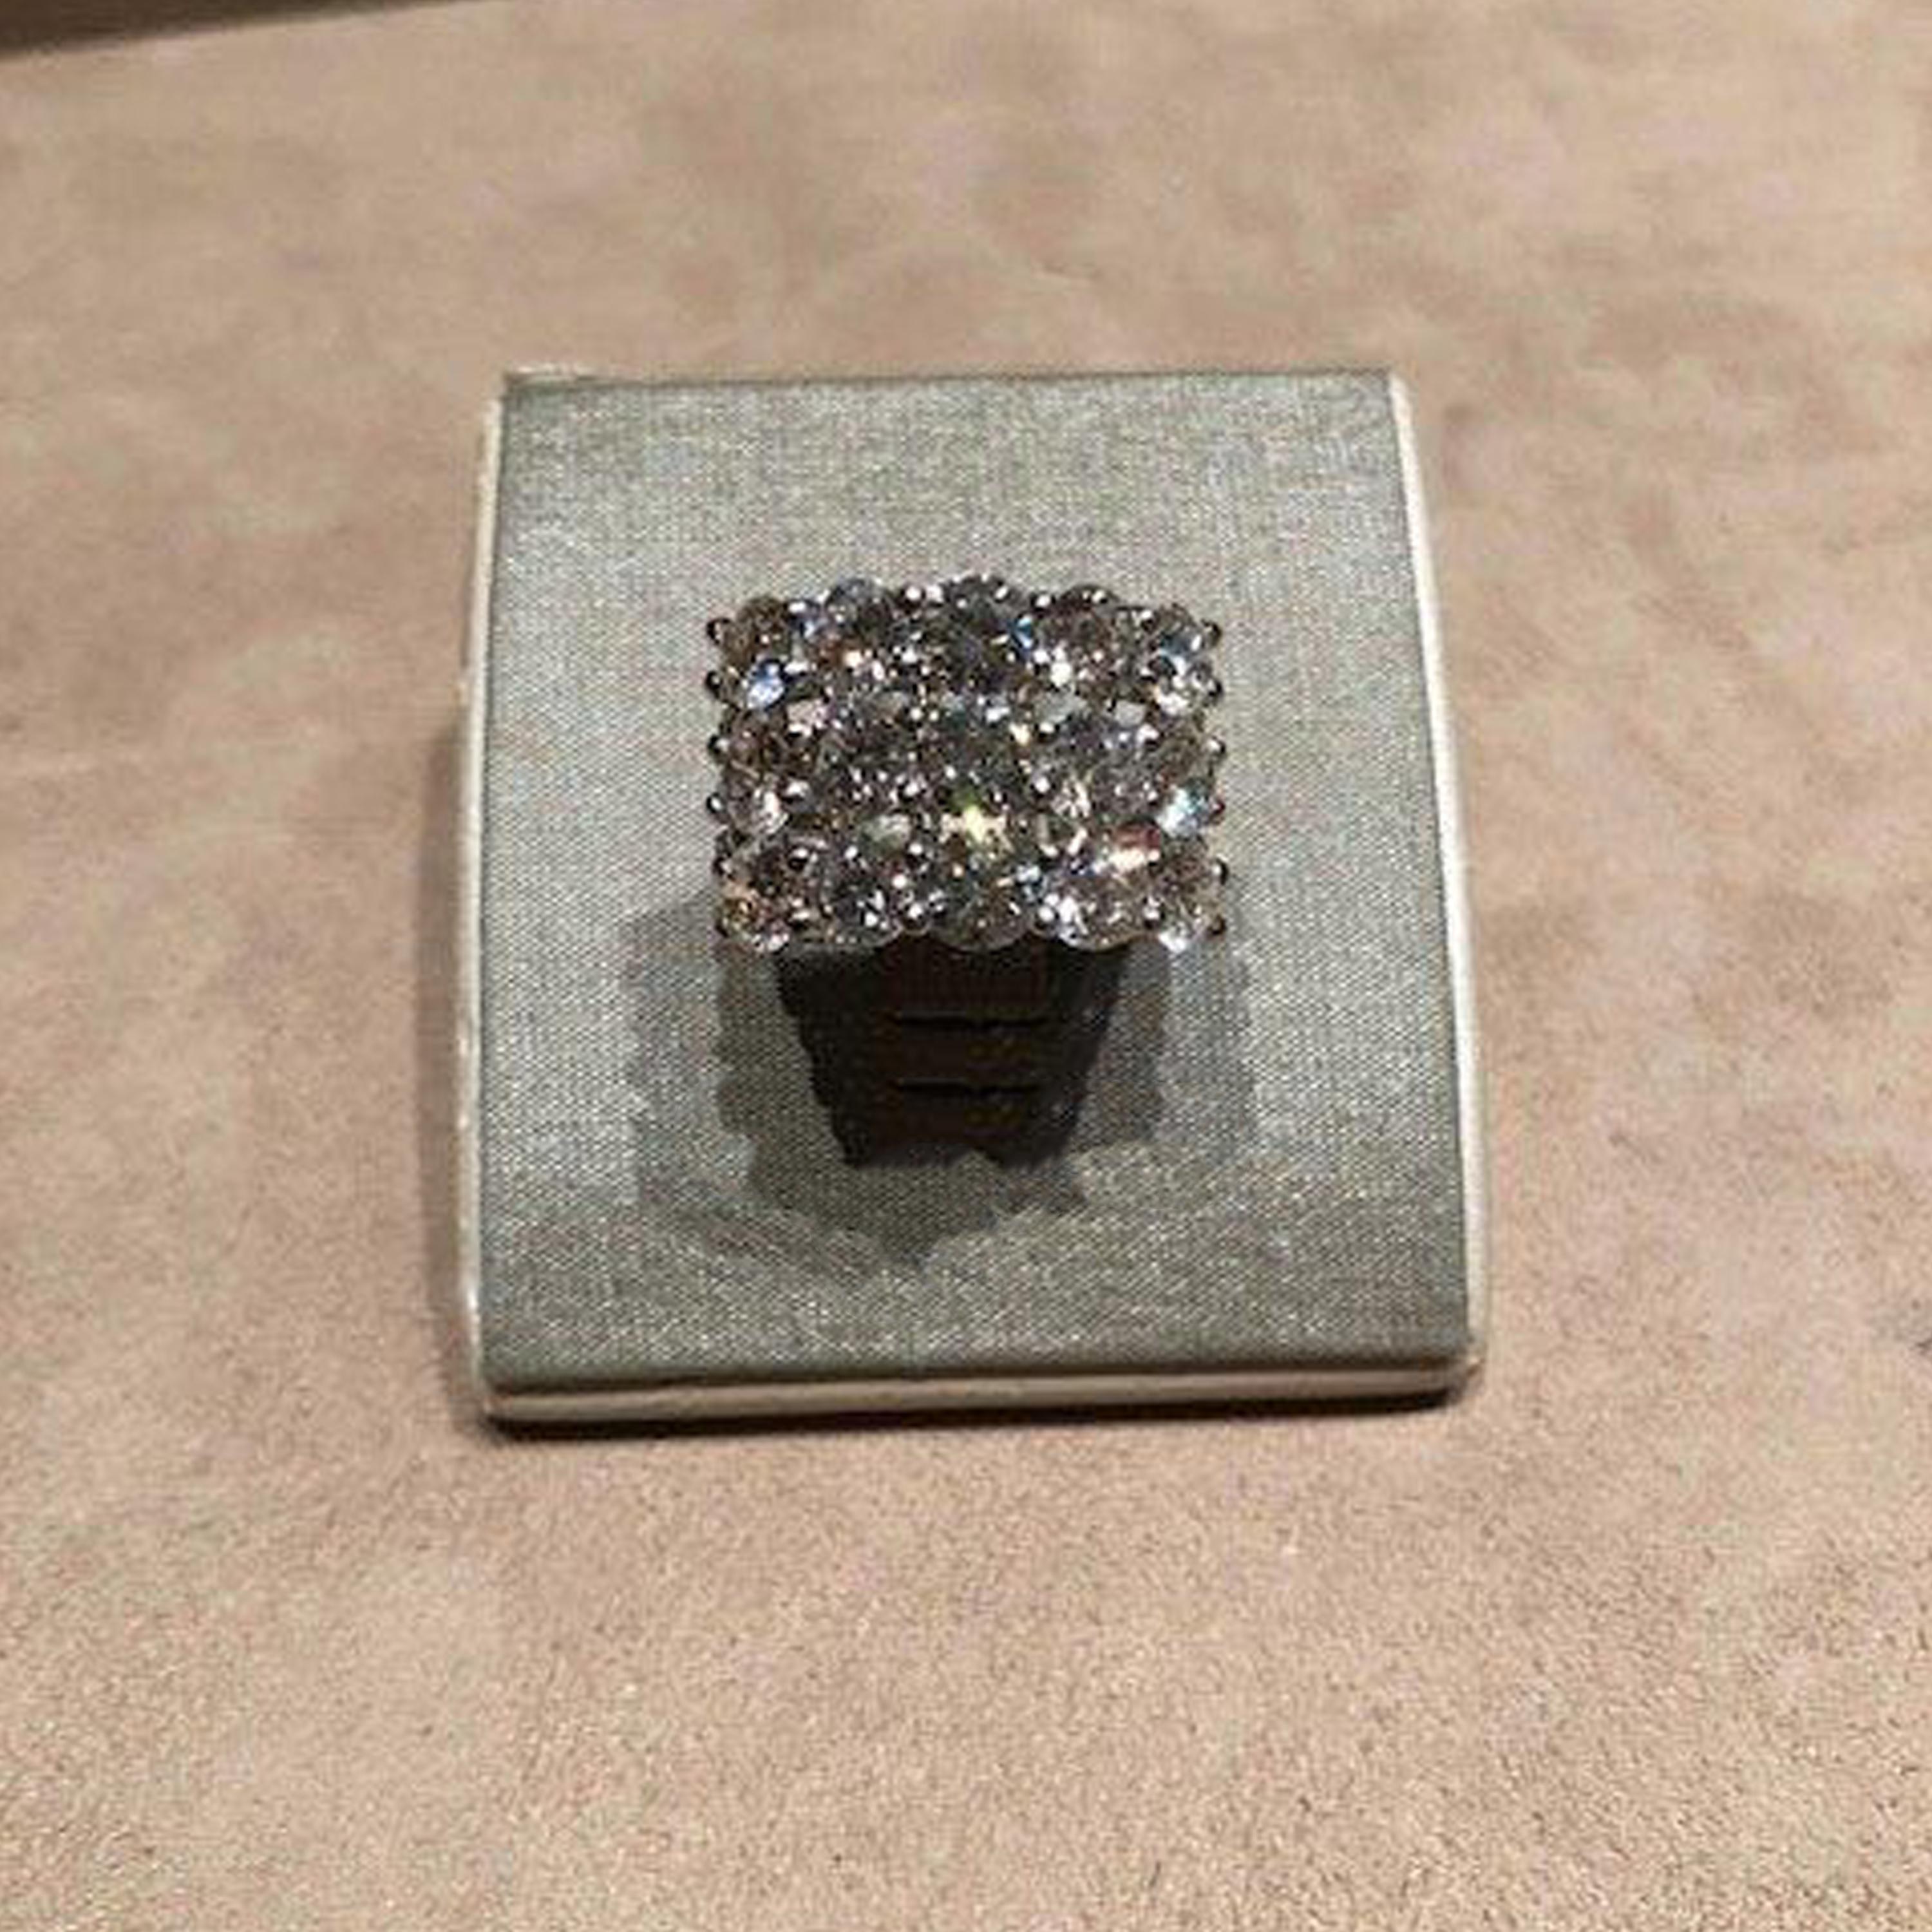 This platinum three row ring showcases 15 round brilliant cut diamonds weighing
4.93 carats total. H-I color, VS-SI clarity. There are 42 full cut diamonds on the sides of the shank that weigh .41 carats total. The width of the ring is 13.5 mm and